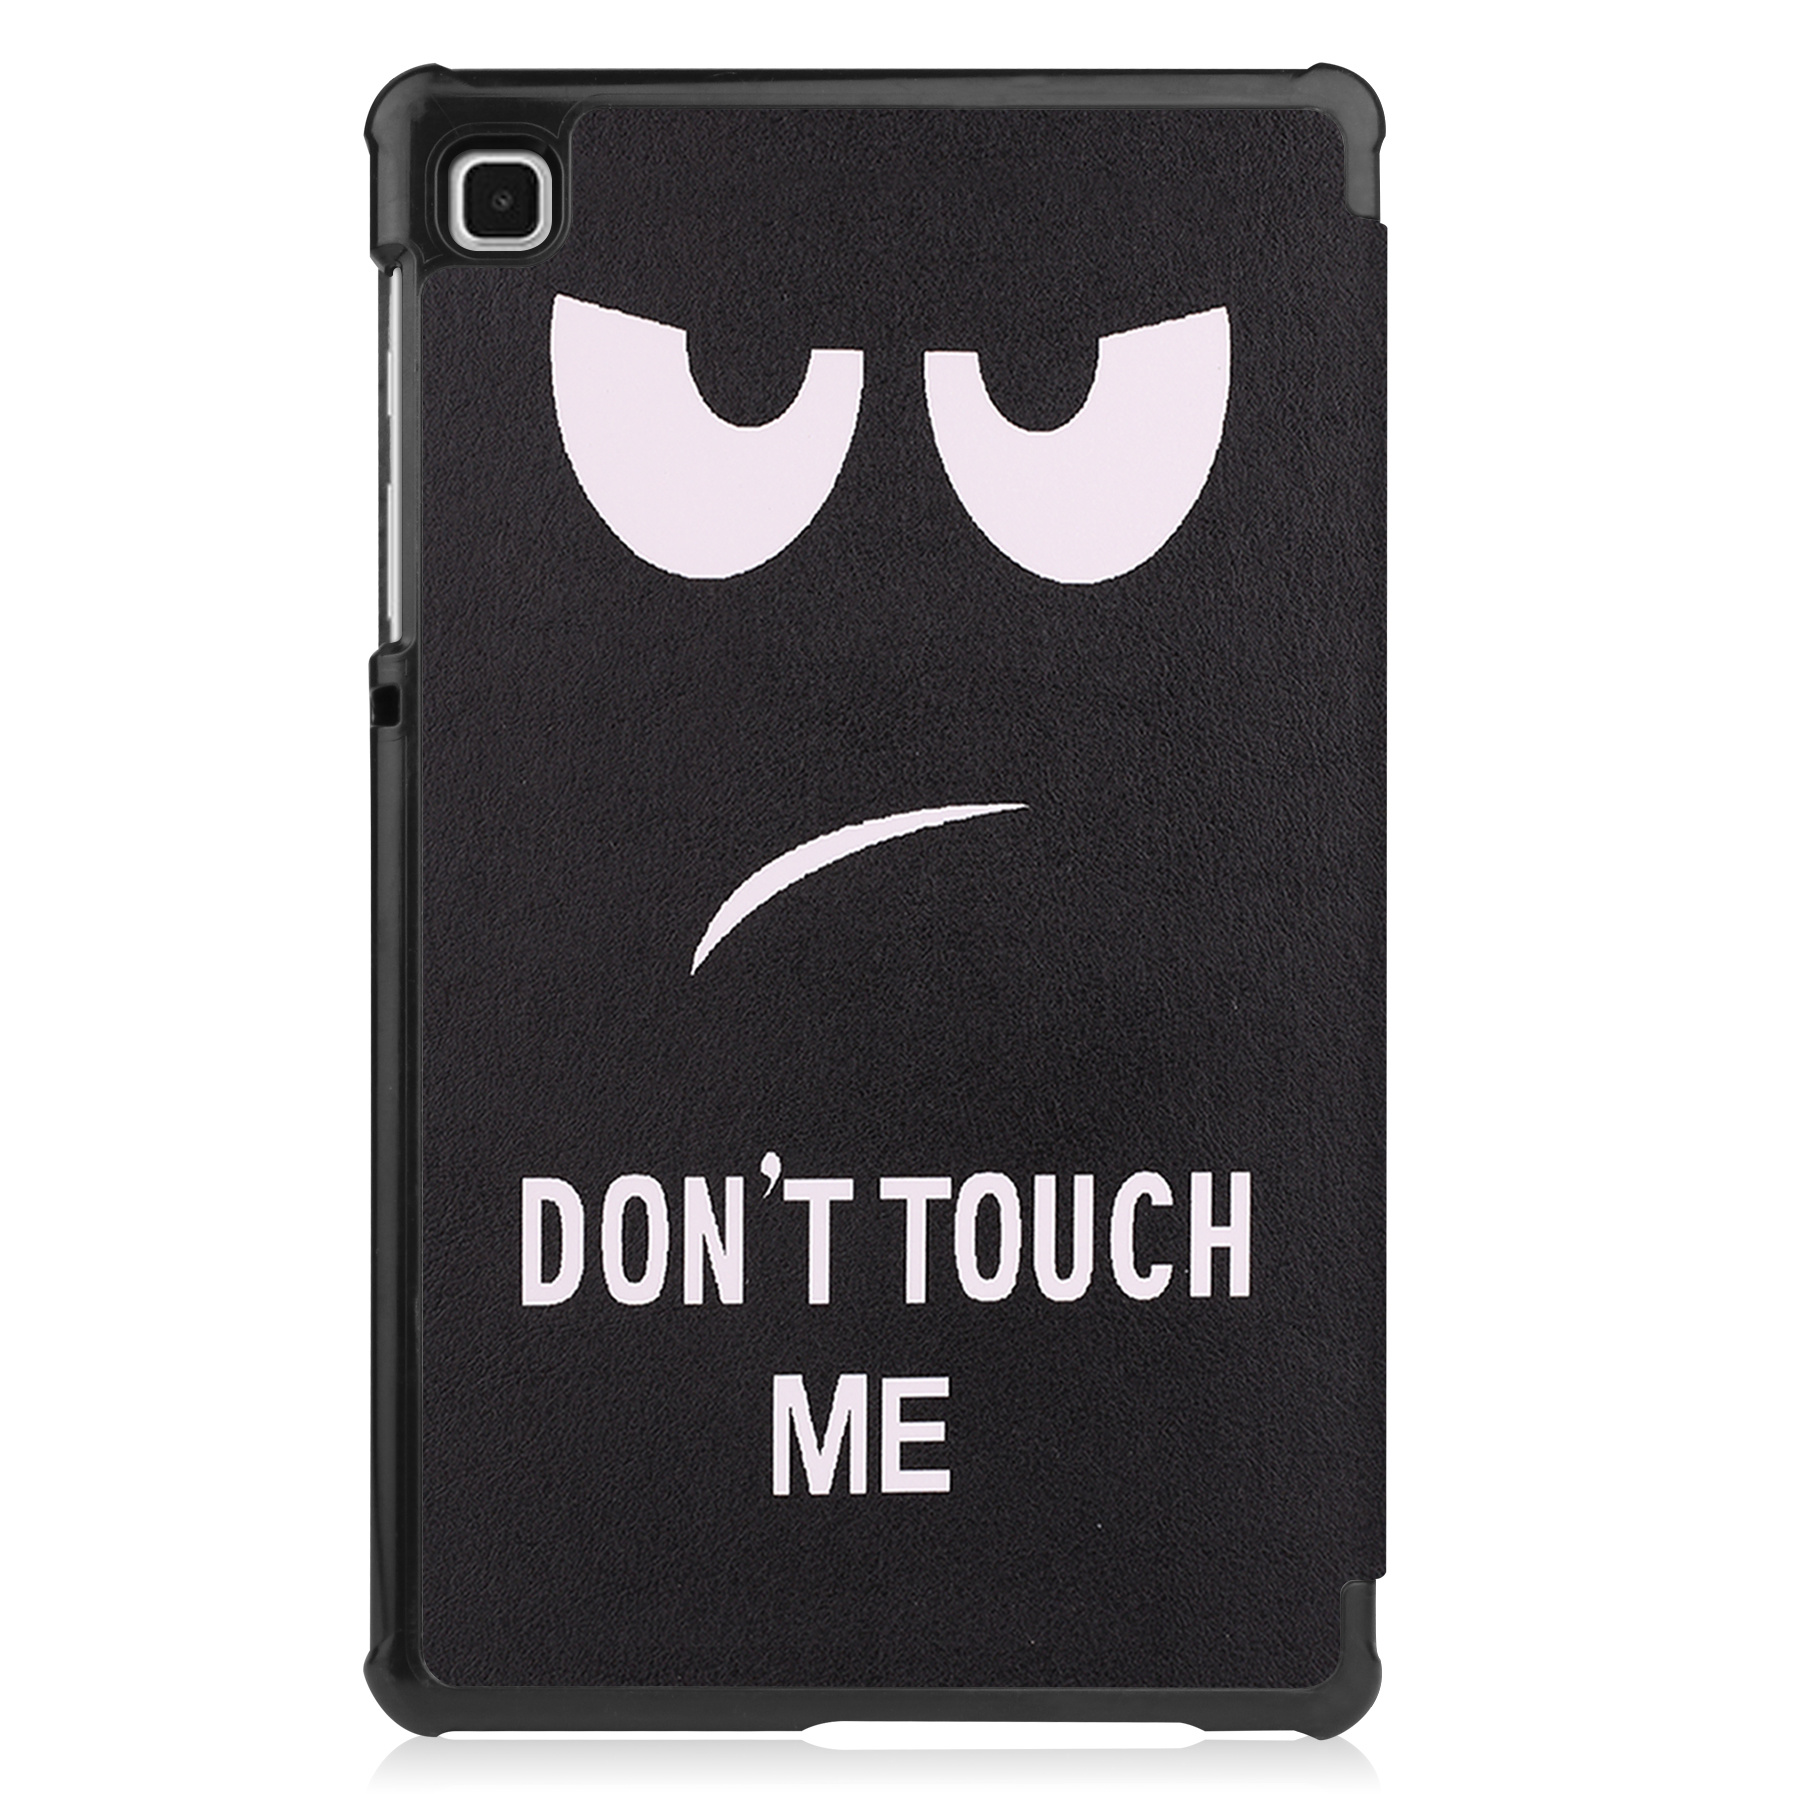 Nomfy Samsung Tab S6 Lite Hoesje Book Case Hoes - Samsung Galaxy Tab S6 Lite Hoes Hardcover Hoesje - Don't Touch Me